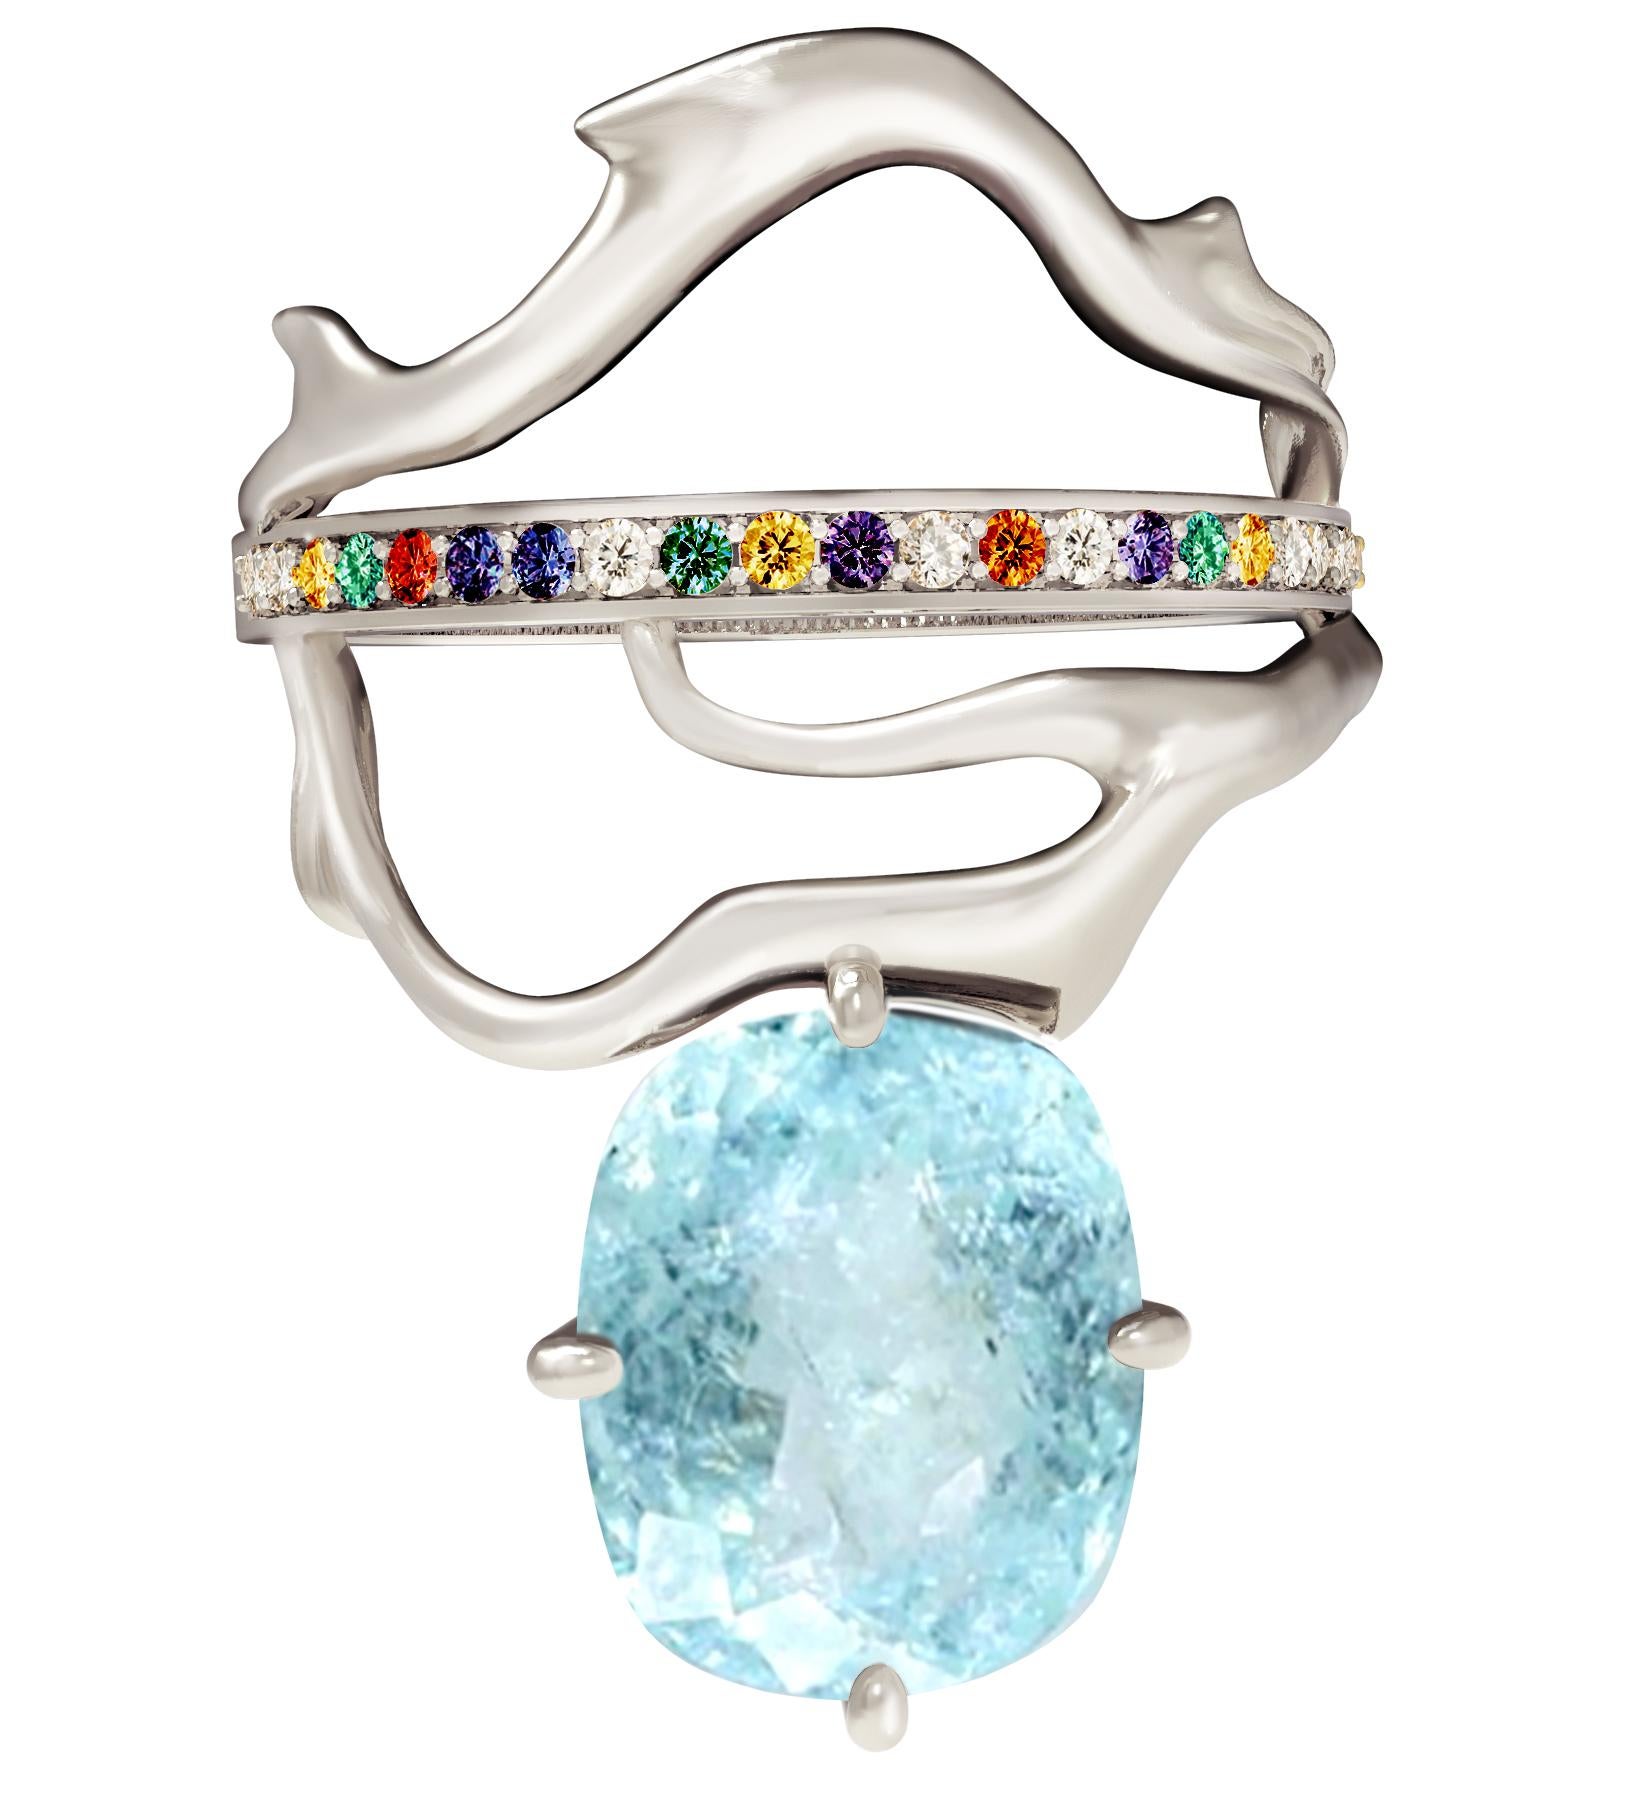 Rose Gold Tibetan Ring with Paraiba Tourmaline, Diamonds and Emeralds For Sale 8